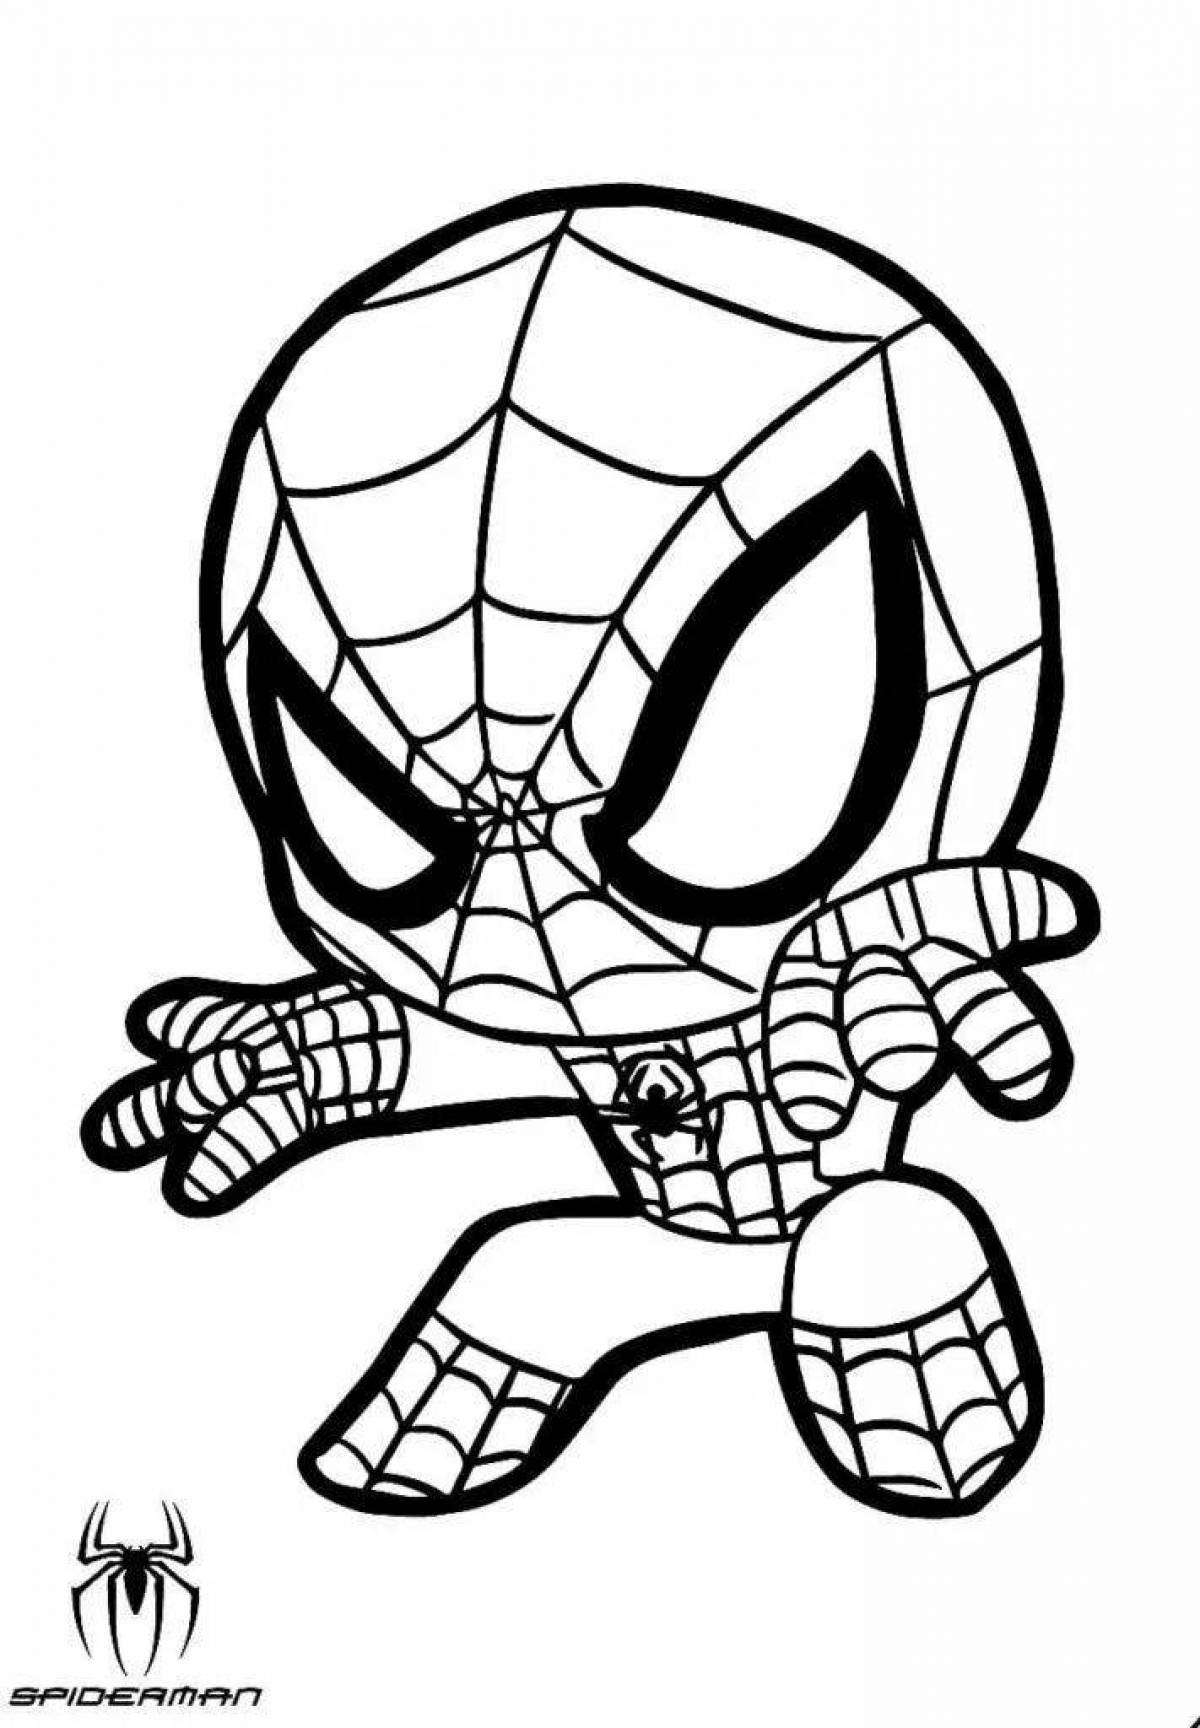 Coloring page intricate spiderman